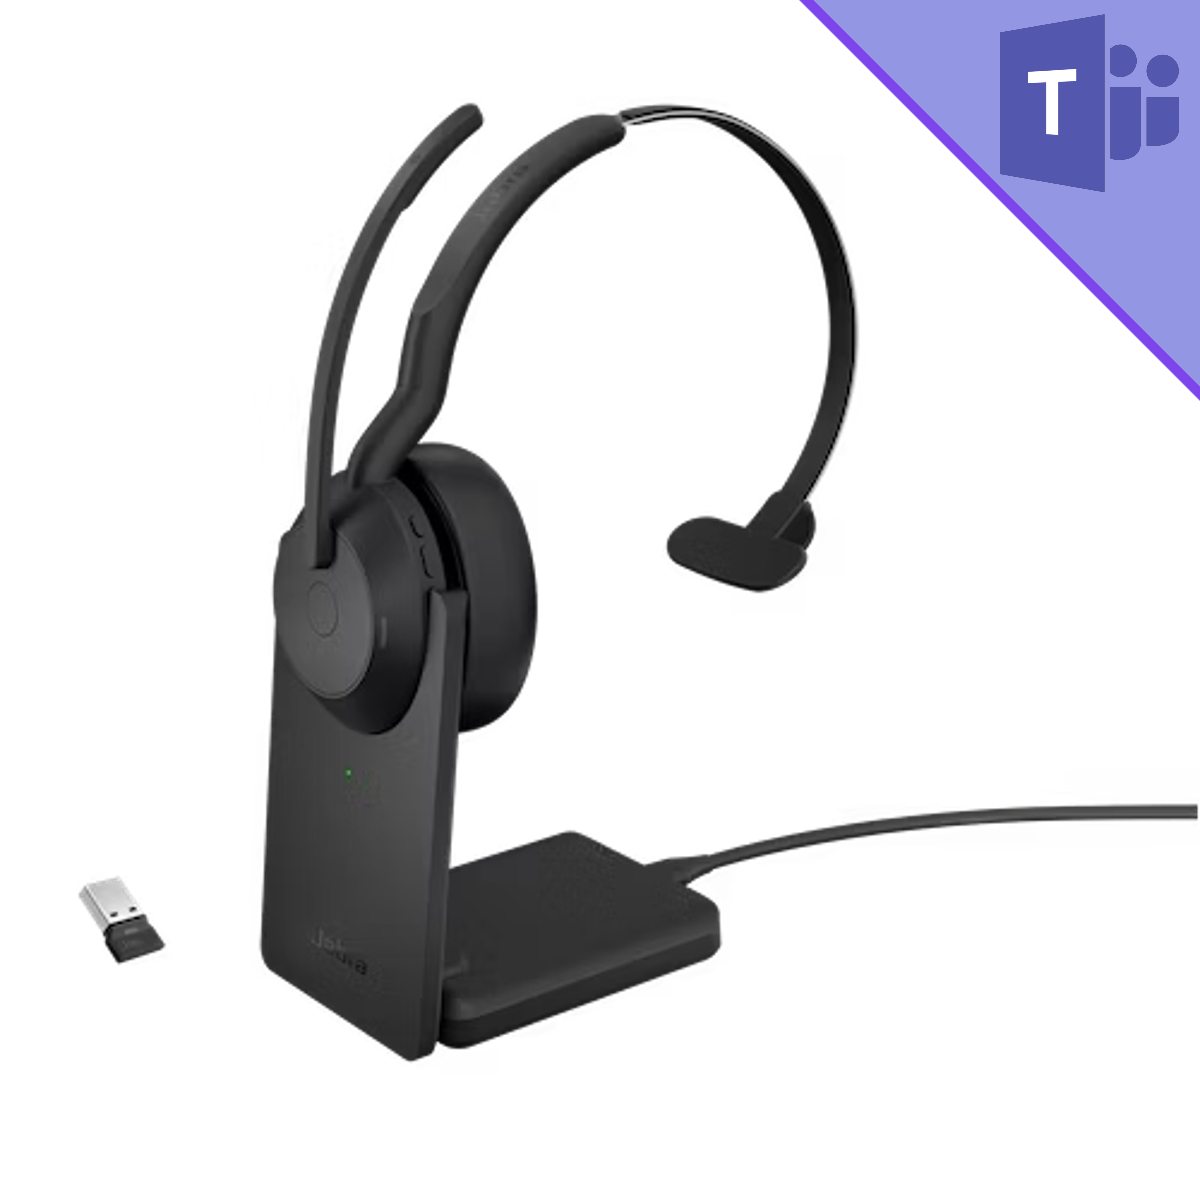 Macondo And Adapter | Headset | With Networks Teams Mono 380A MS Stand Link 55 Evolve2 Jabra (25599-899-989-01) Bluetooth USB-A